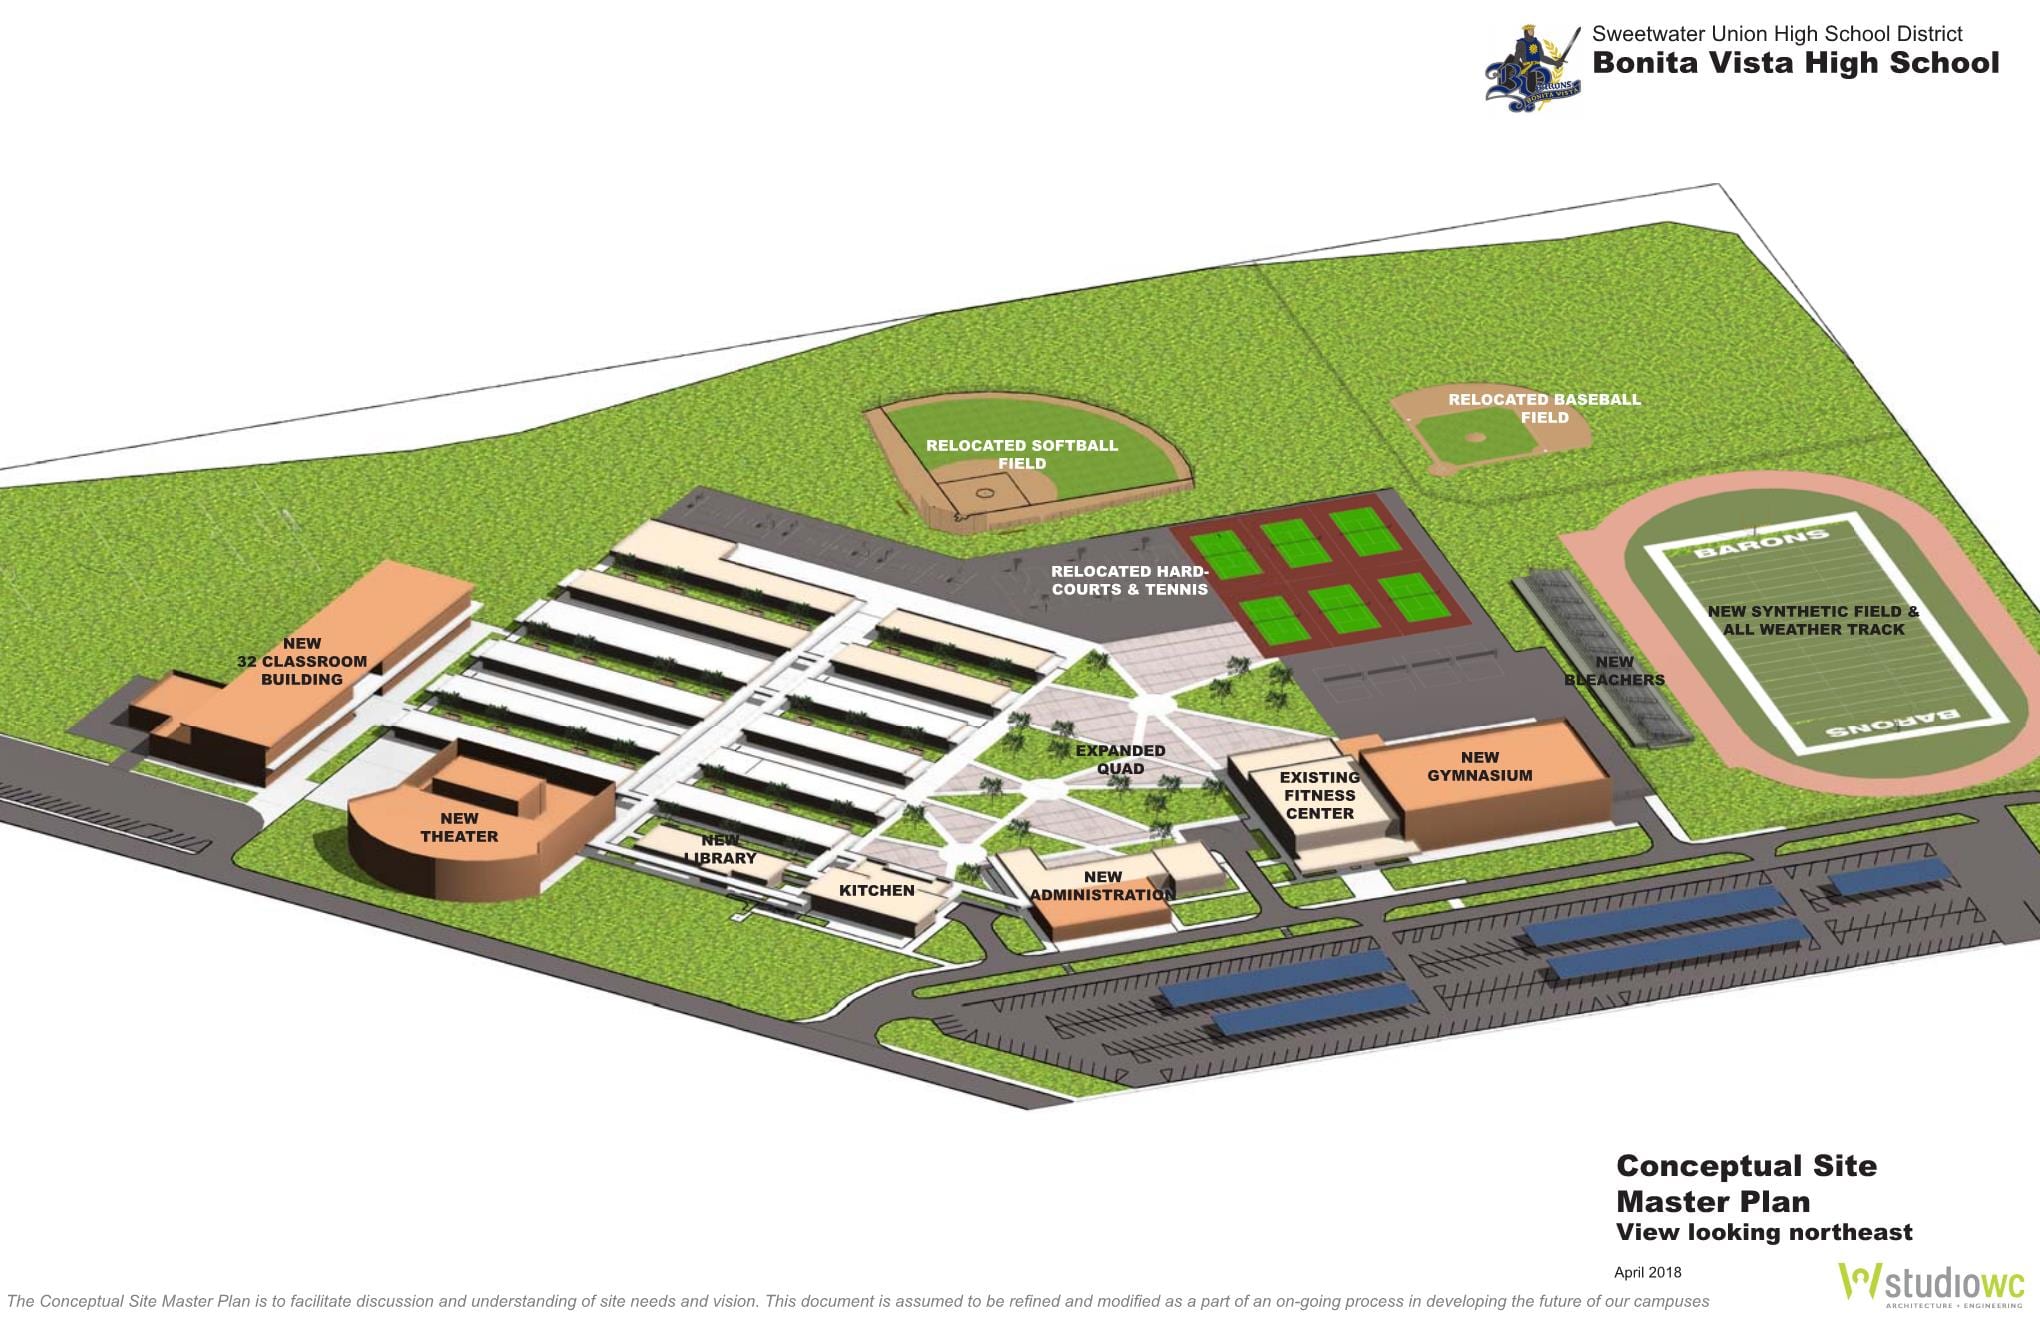 Sweetwater Union High School District Master Plans Studiowc